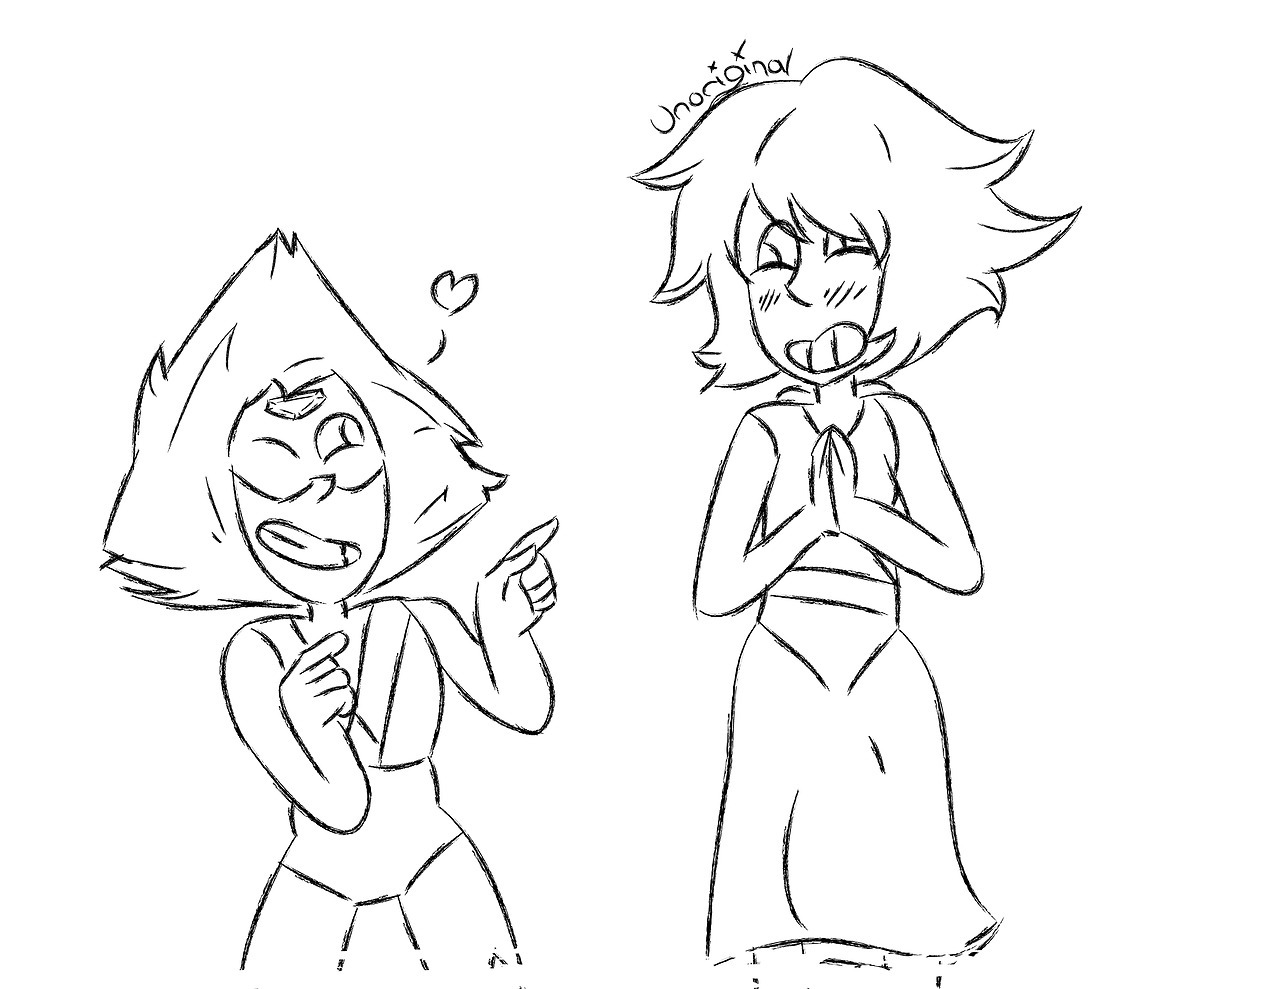 Today’s requested drawing: Lapidot. It seems a lot of people, including myself, really like Lapis and Peri. Knowing me, ill most likely touch up the sketch and color it tomorrow. Requested by @rugphan